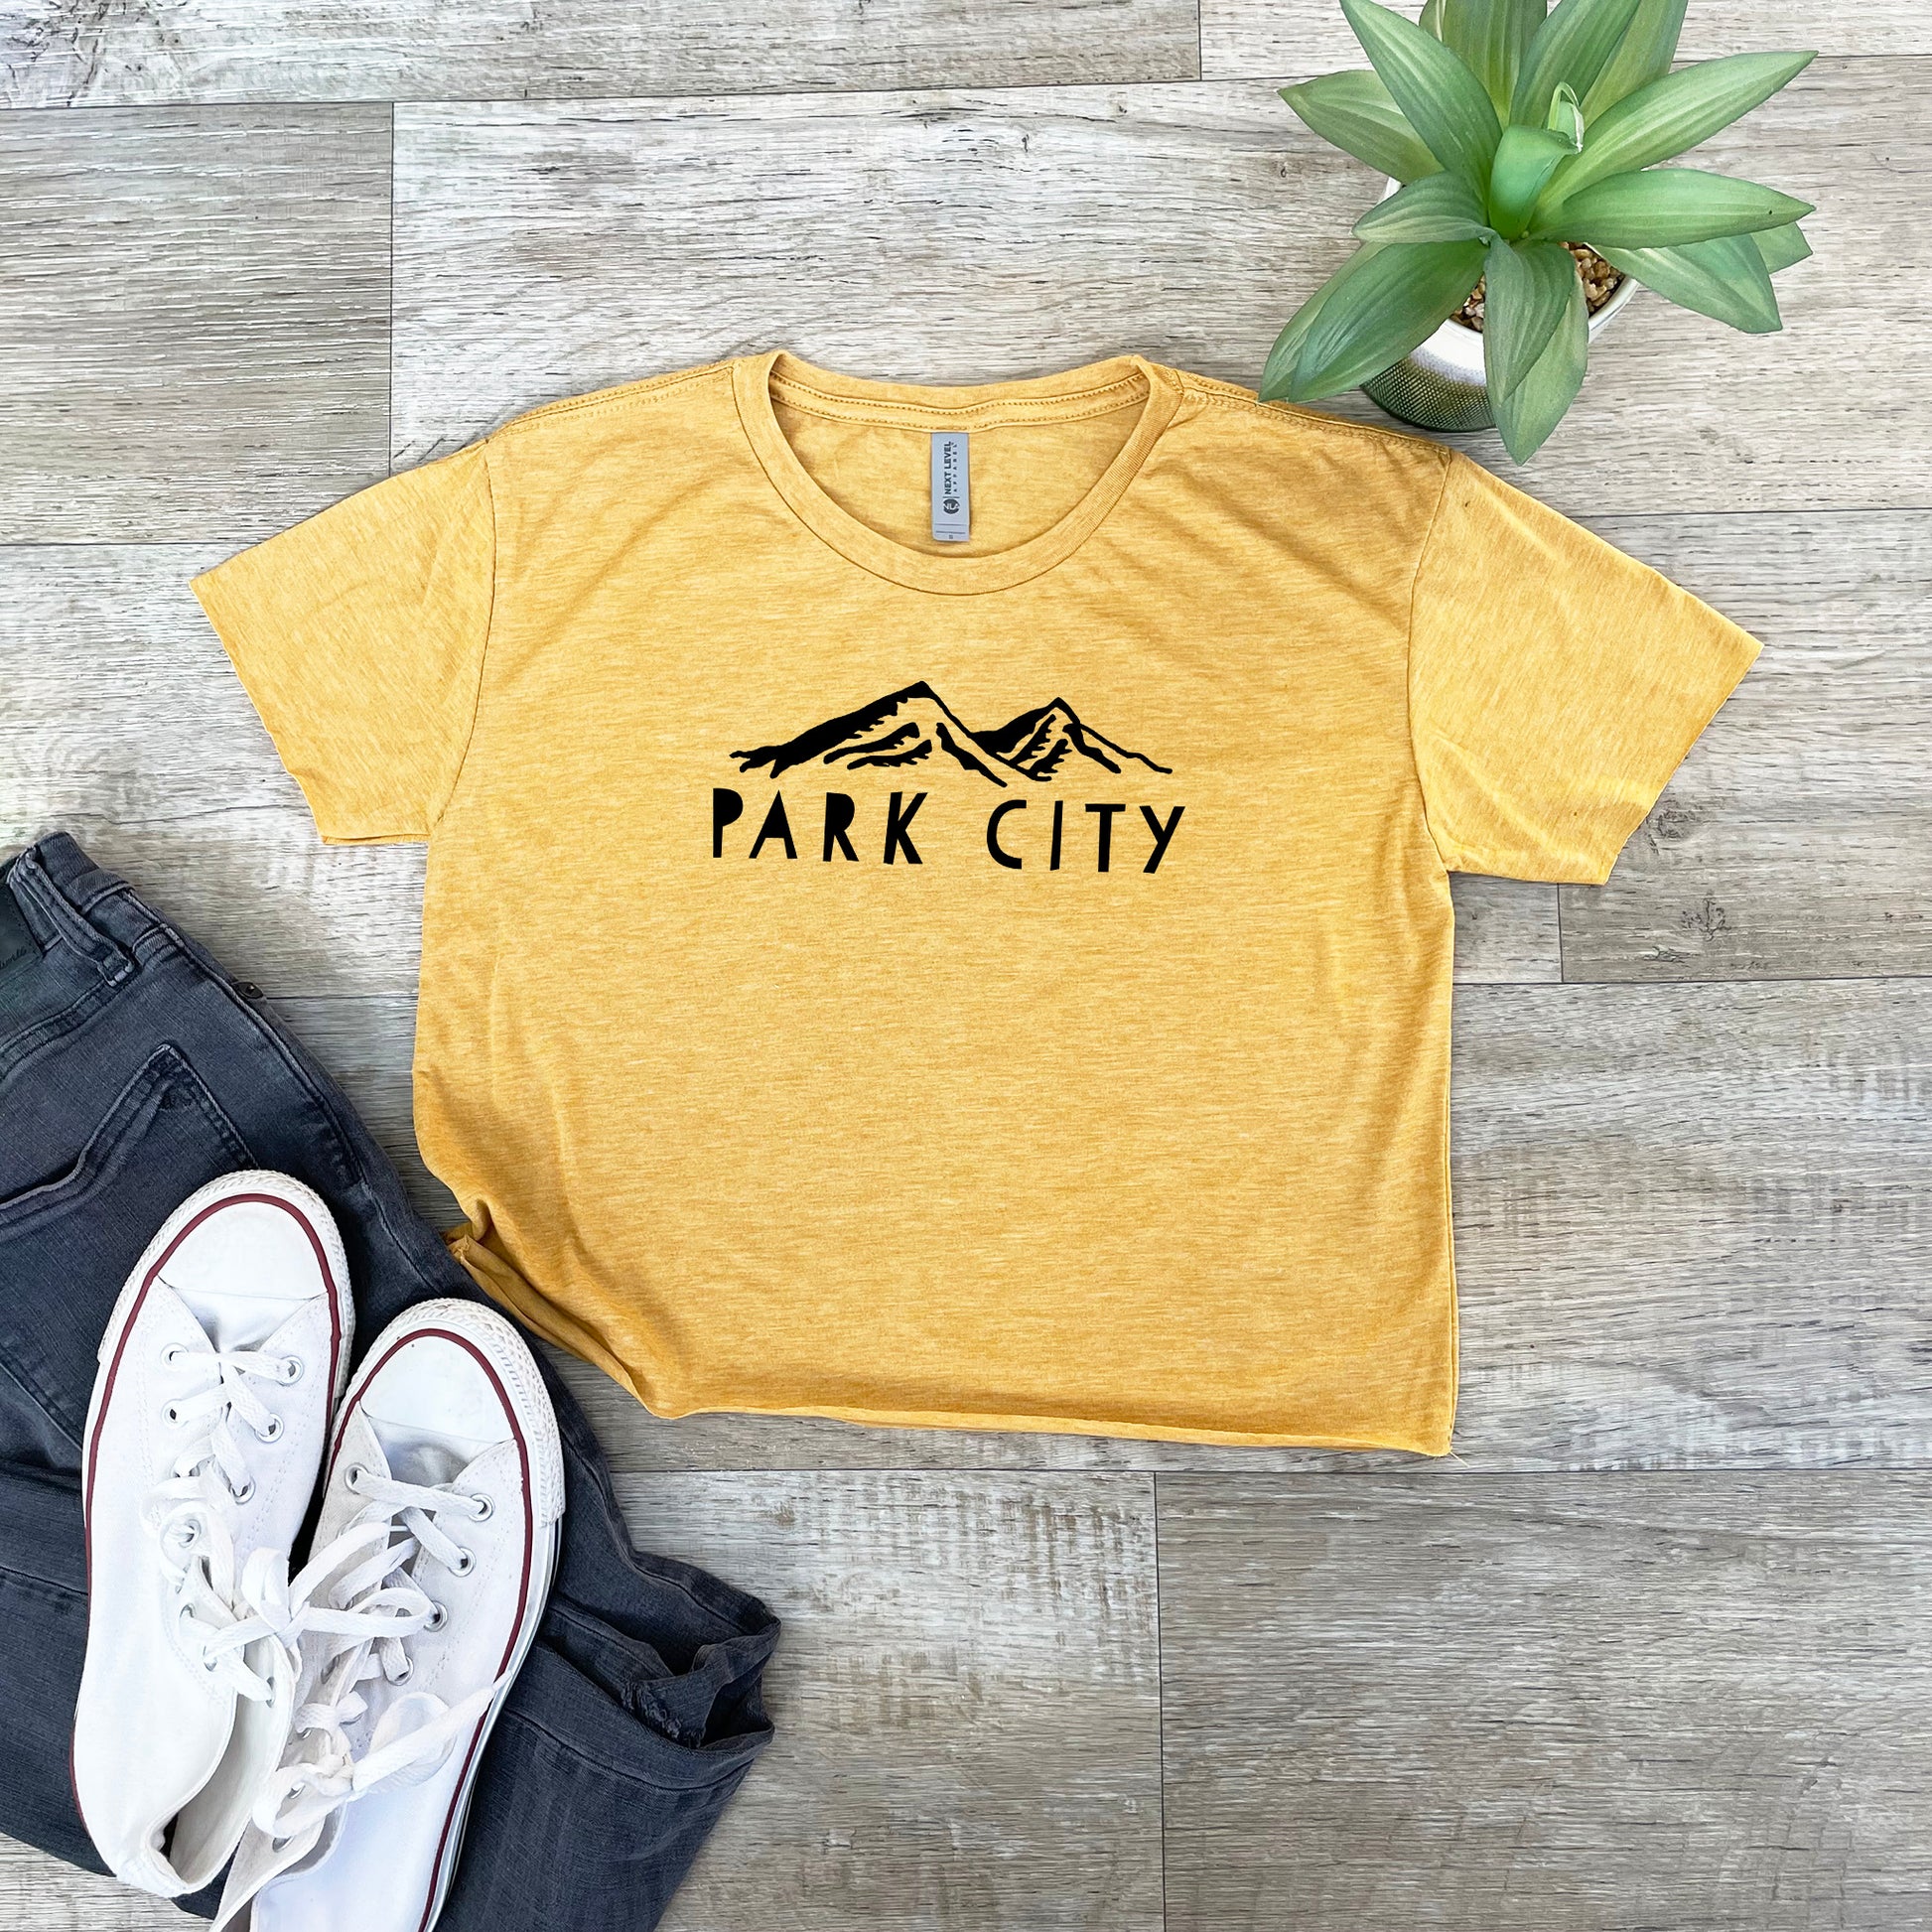 a t - shirt that says park city on it next to a pair of jeans